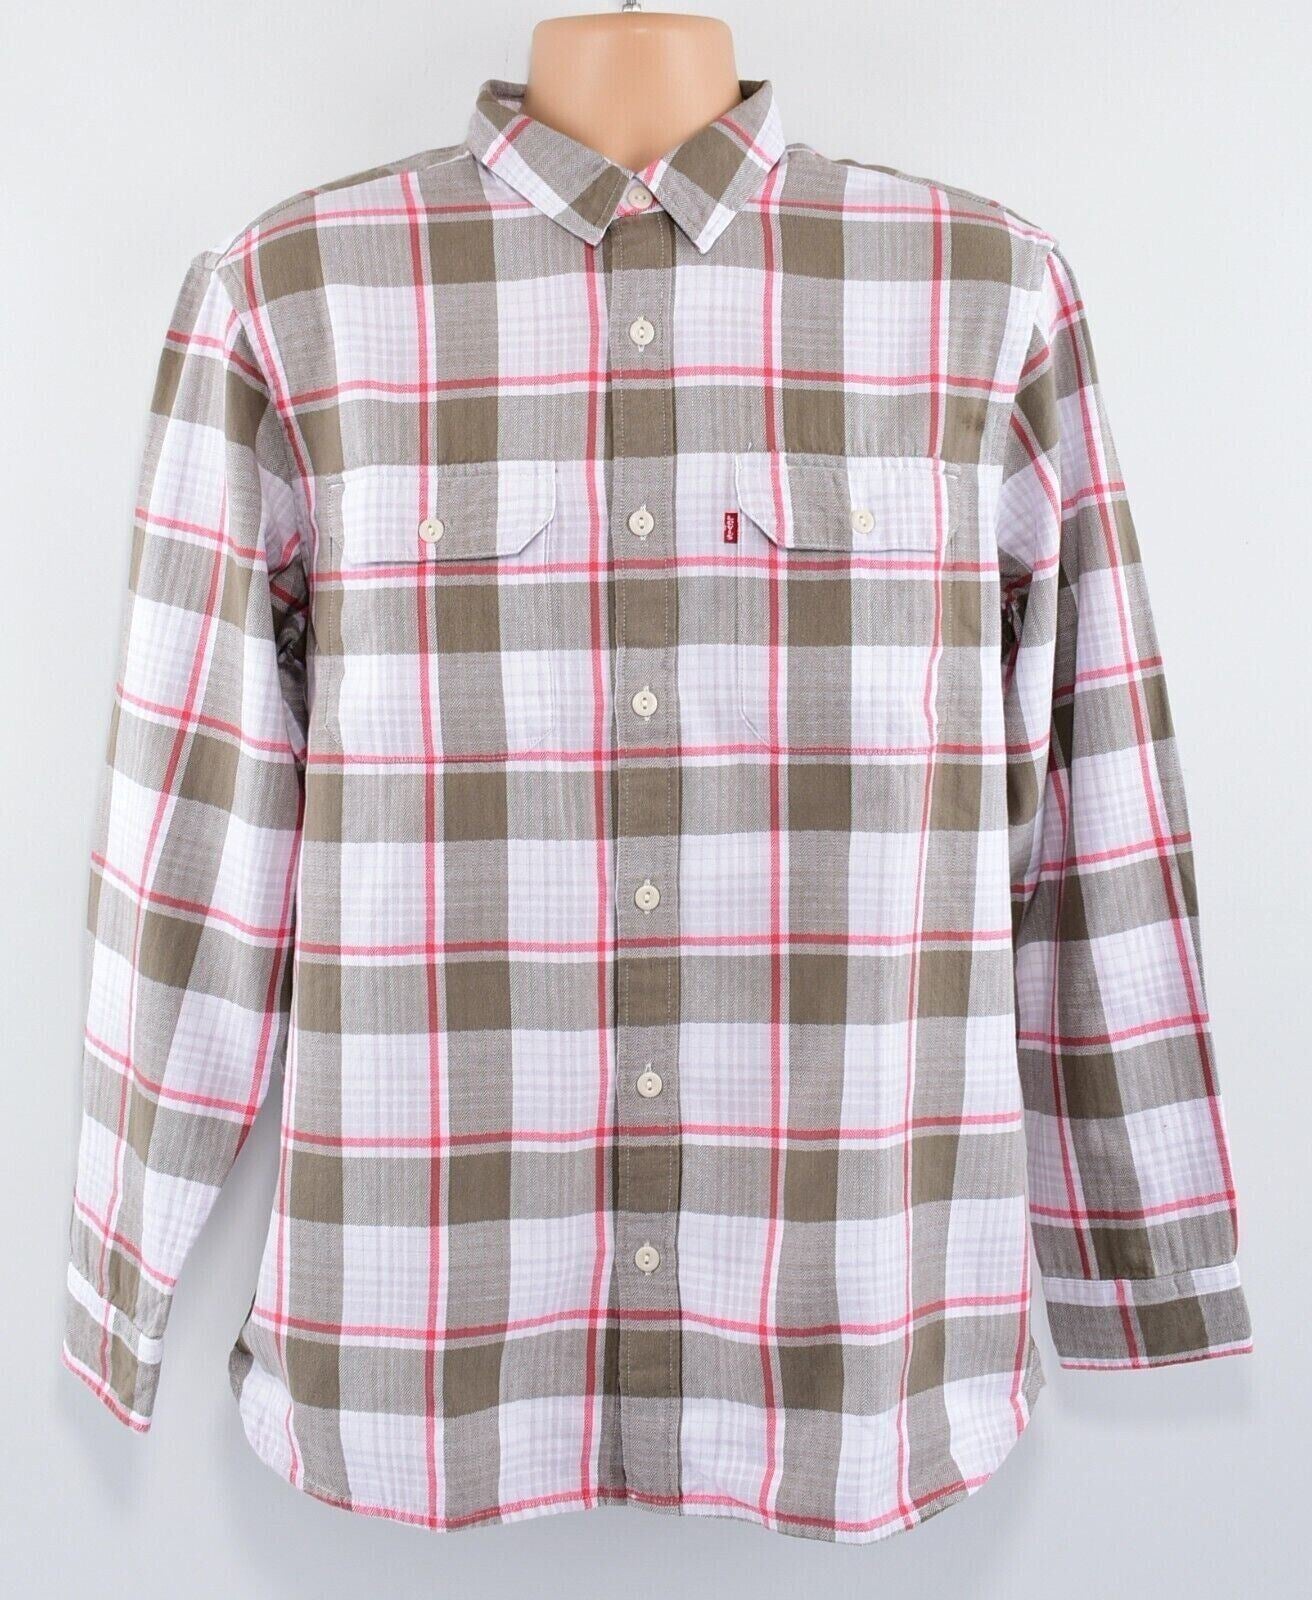 LEVI'S Mens Jackson Checked Worker Shirt, Relaxed Fit, Multicoloured, size LARGE